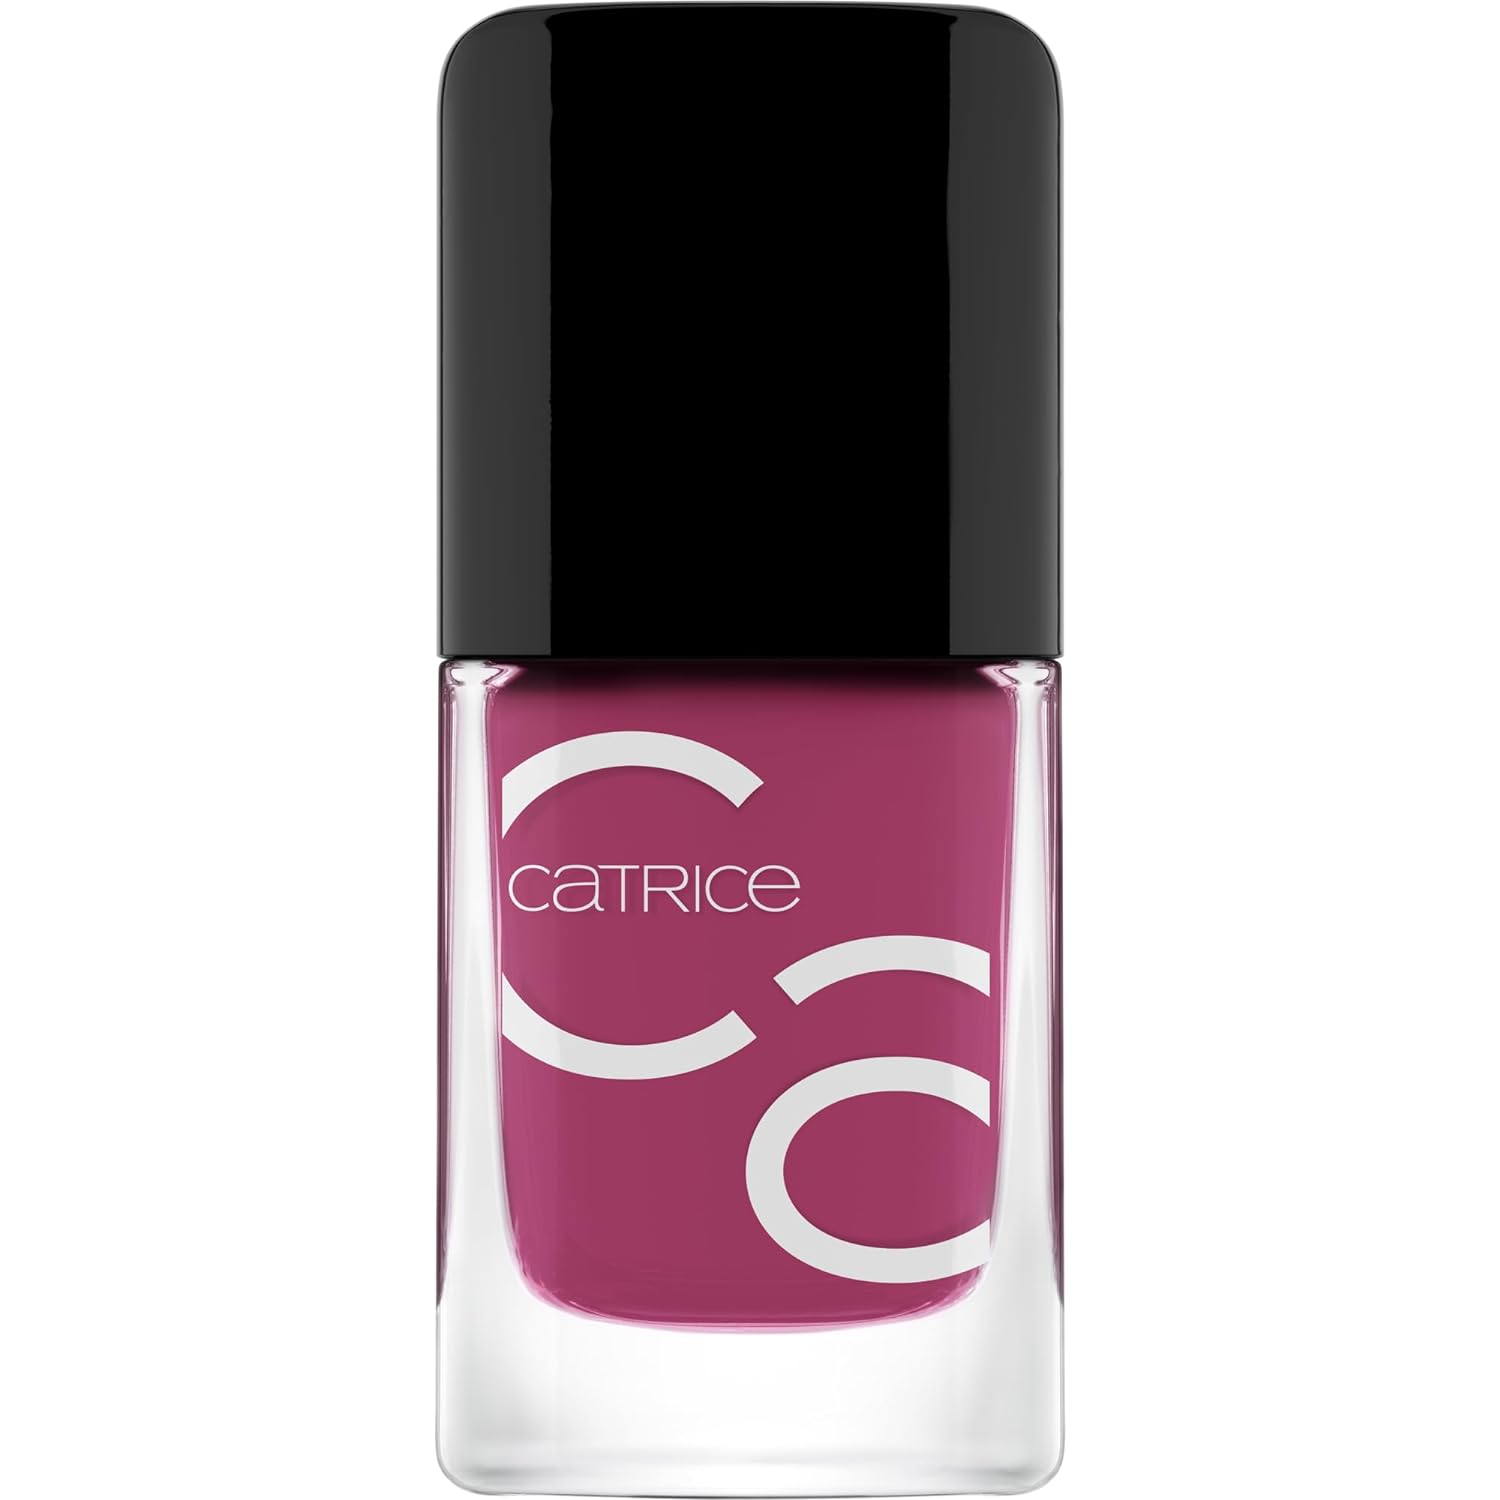 Catrice Catrice Iconails Gel Lacquer, Nail Polish, No. 177, Pink, Long-Lasting, Shiny, Acetone-Free, Vegan, No Microplastic Particles, No Preservatives, Pack of 10.5 ml